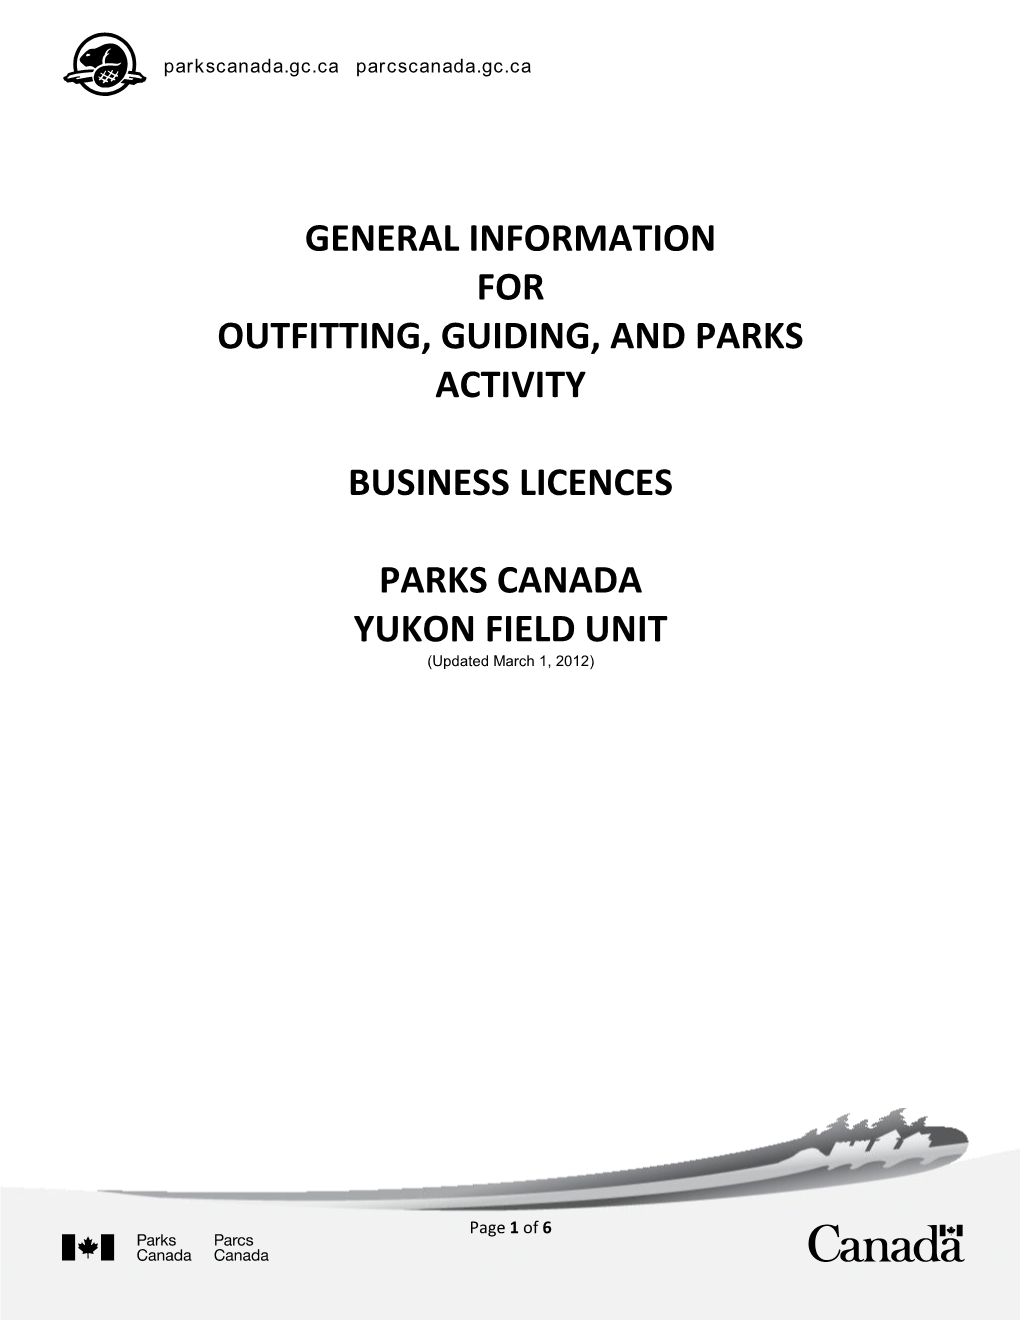 General Information for Outfitting, Guiding, and Parks Activity